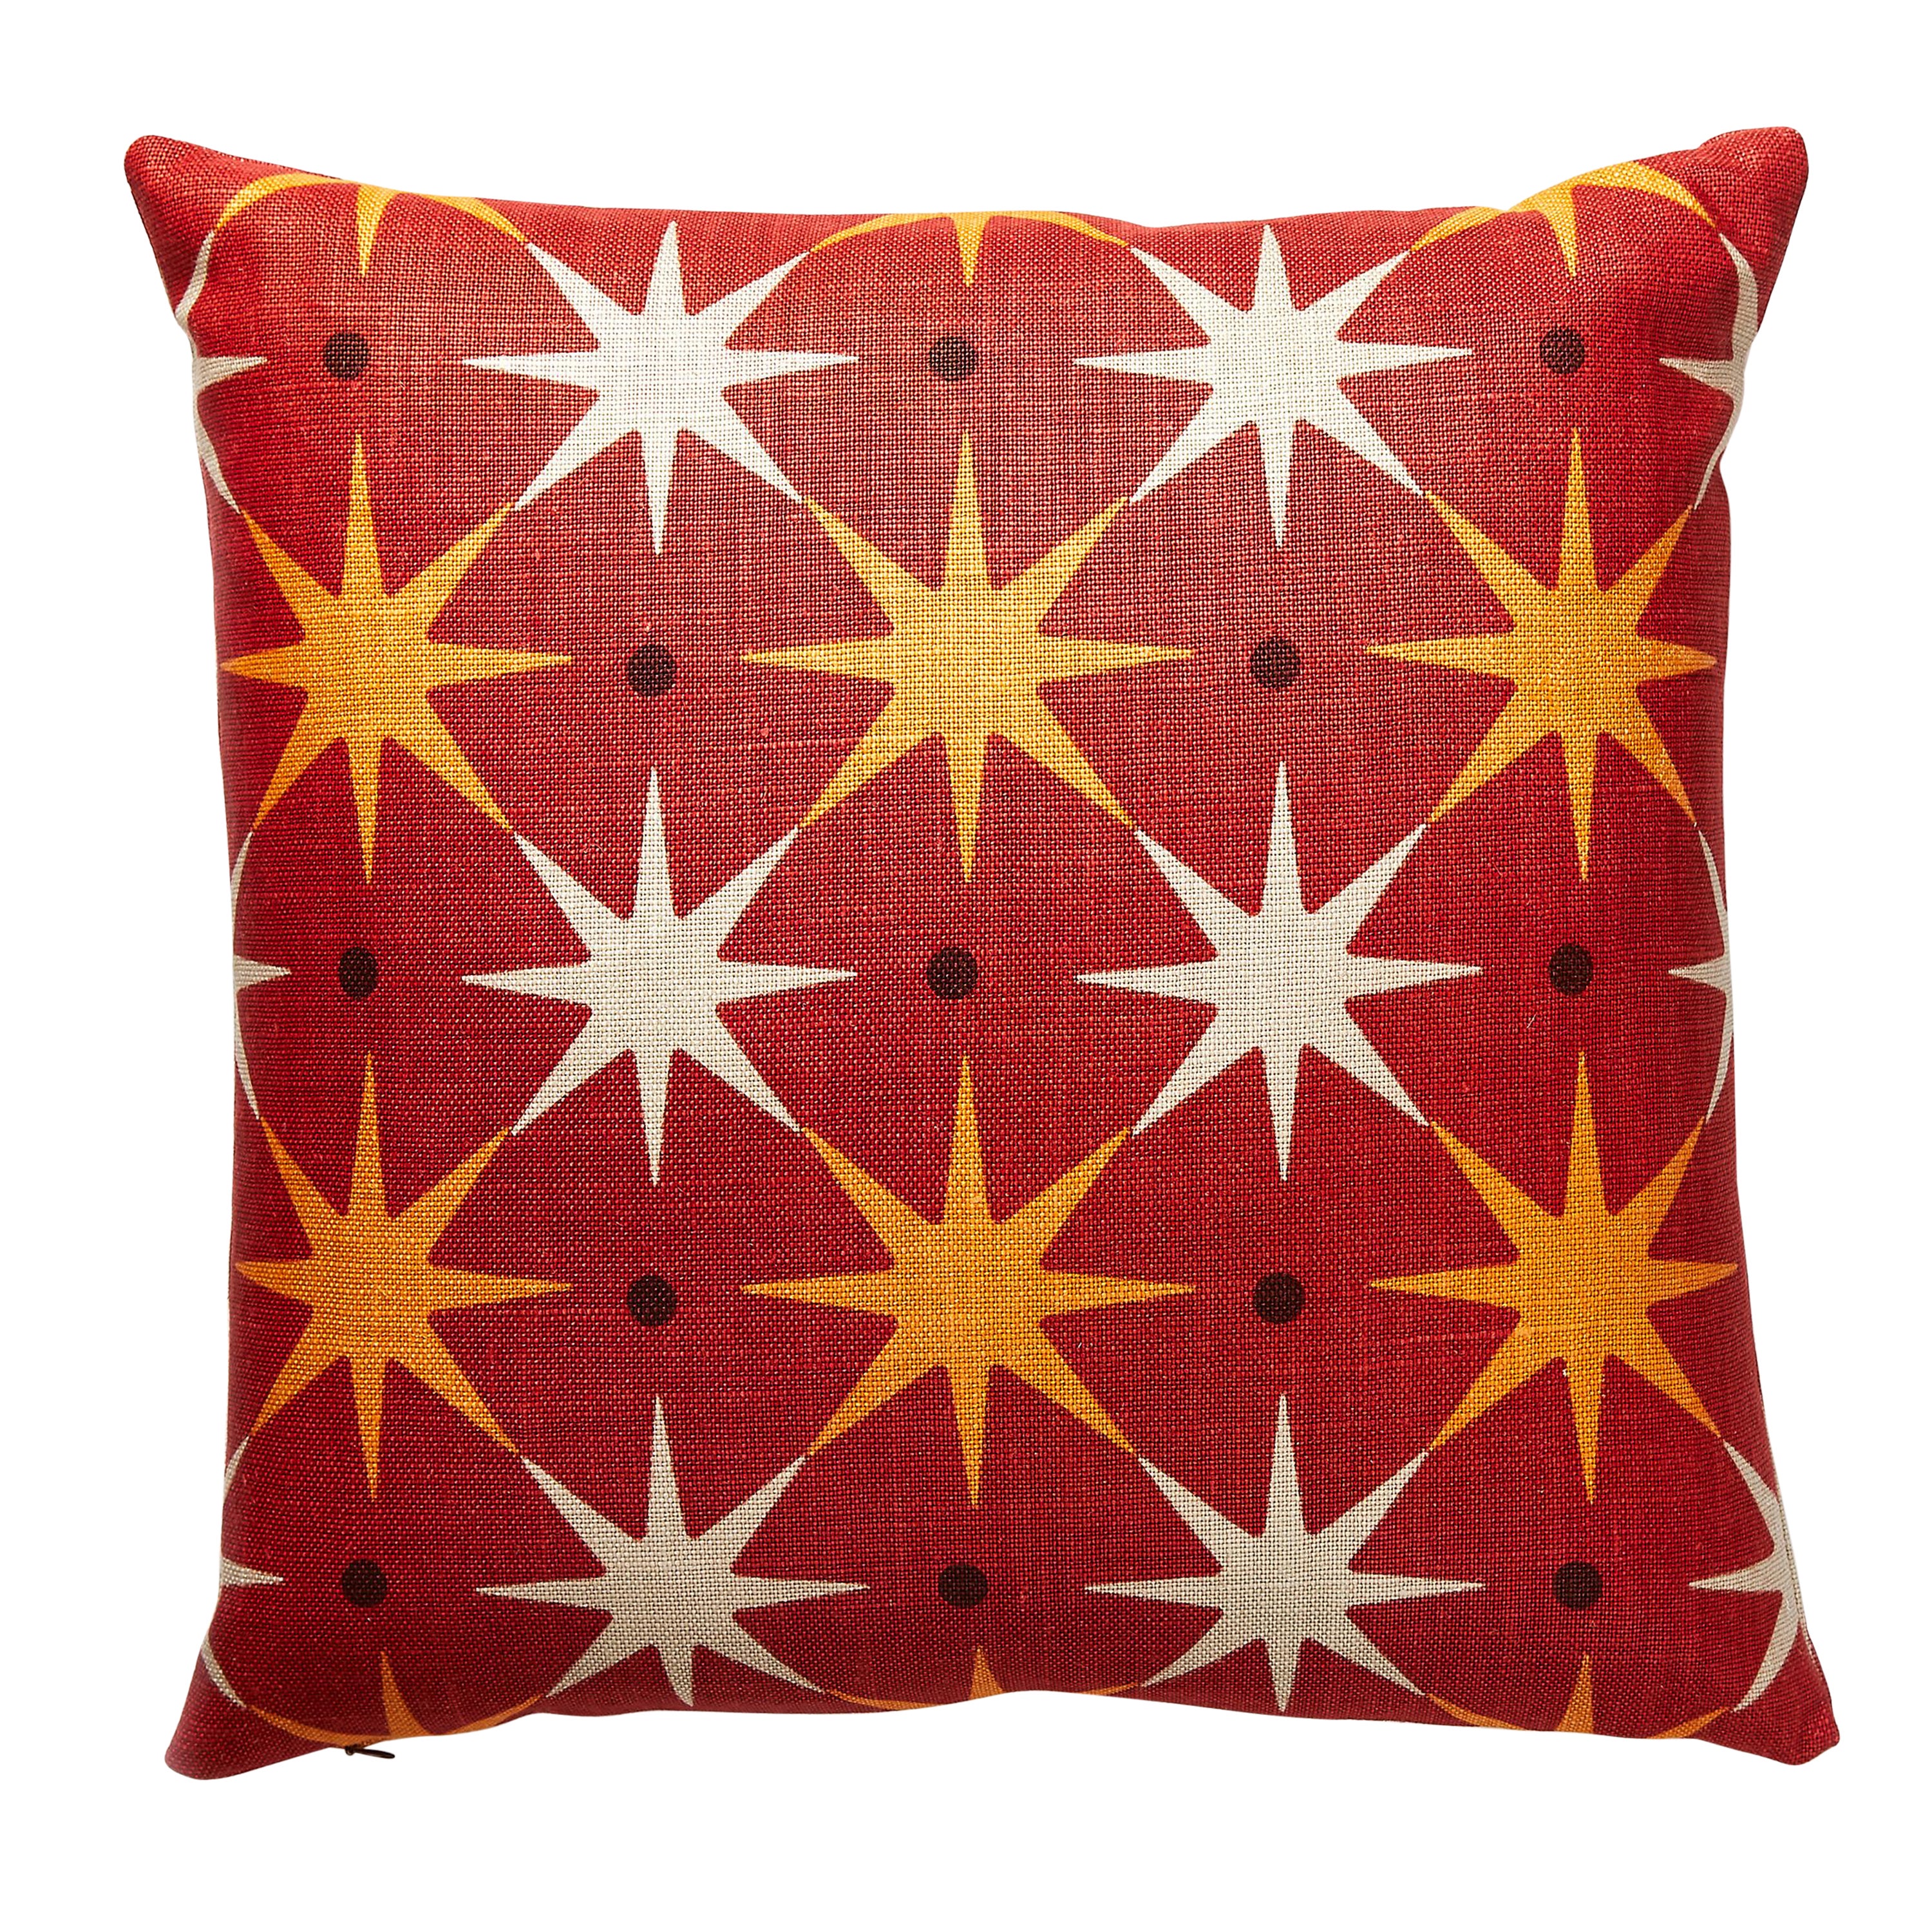 Star Power Pillow For Sale